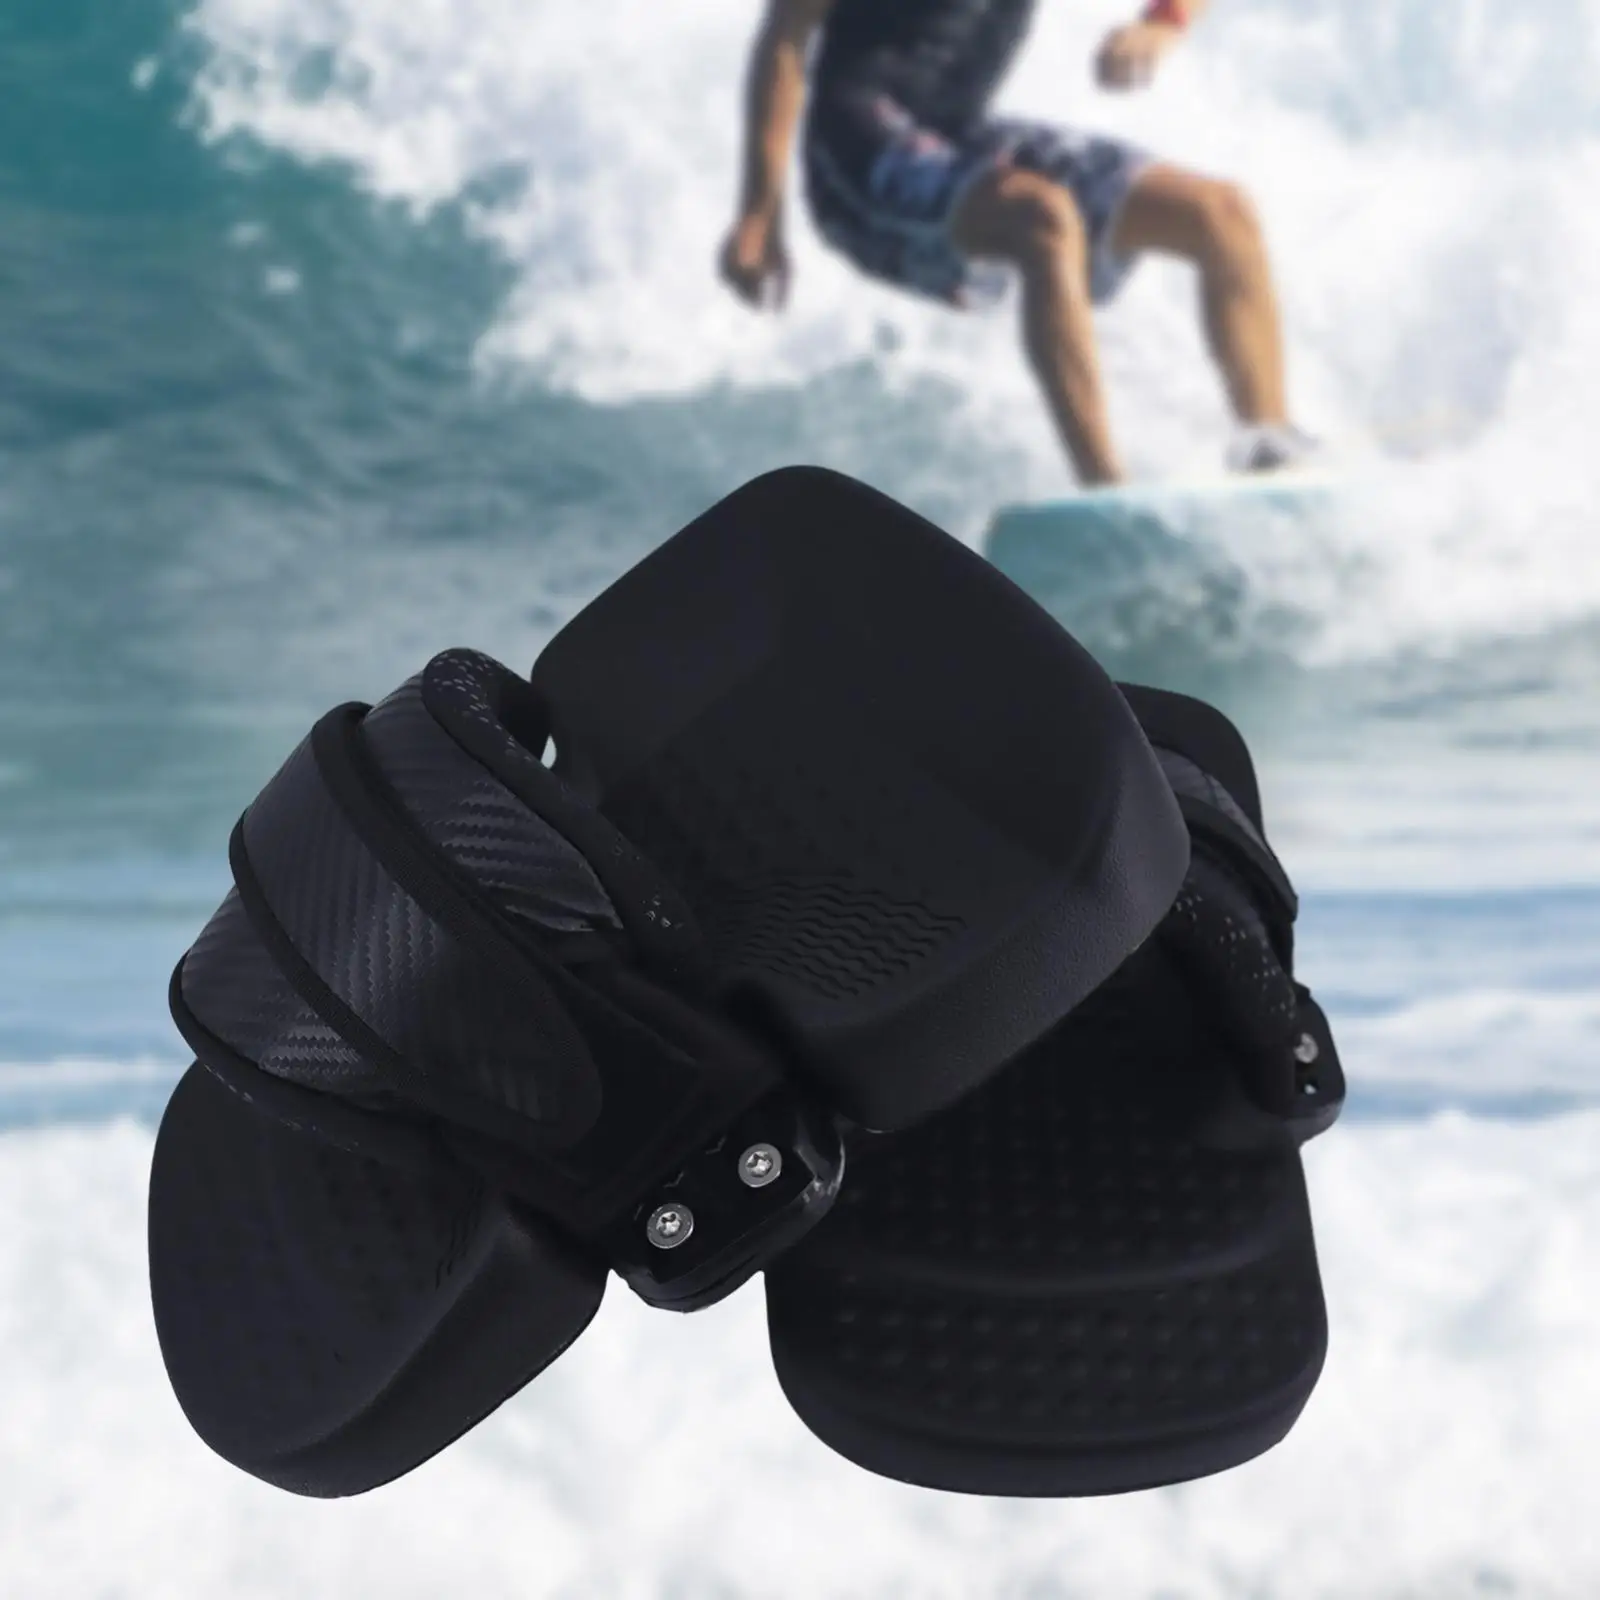 Rubber Kiteboard Boots Surf Board Foot Covers Adjustable Multifunctional Durable Accessory 11.8x7inch for Inflatable Surfboard